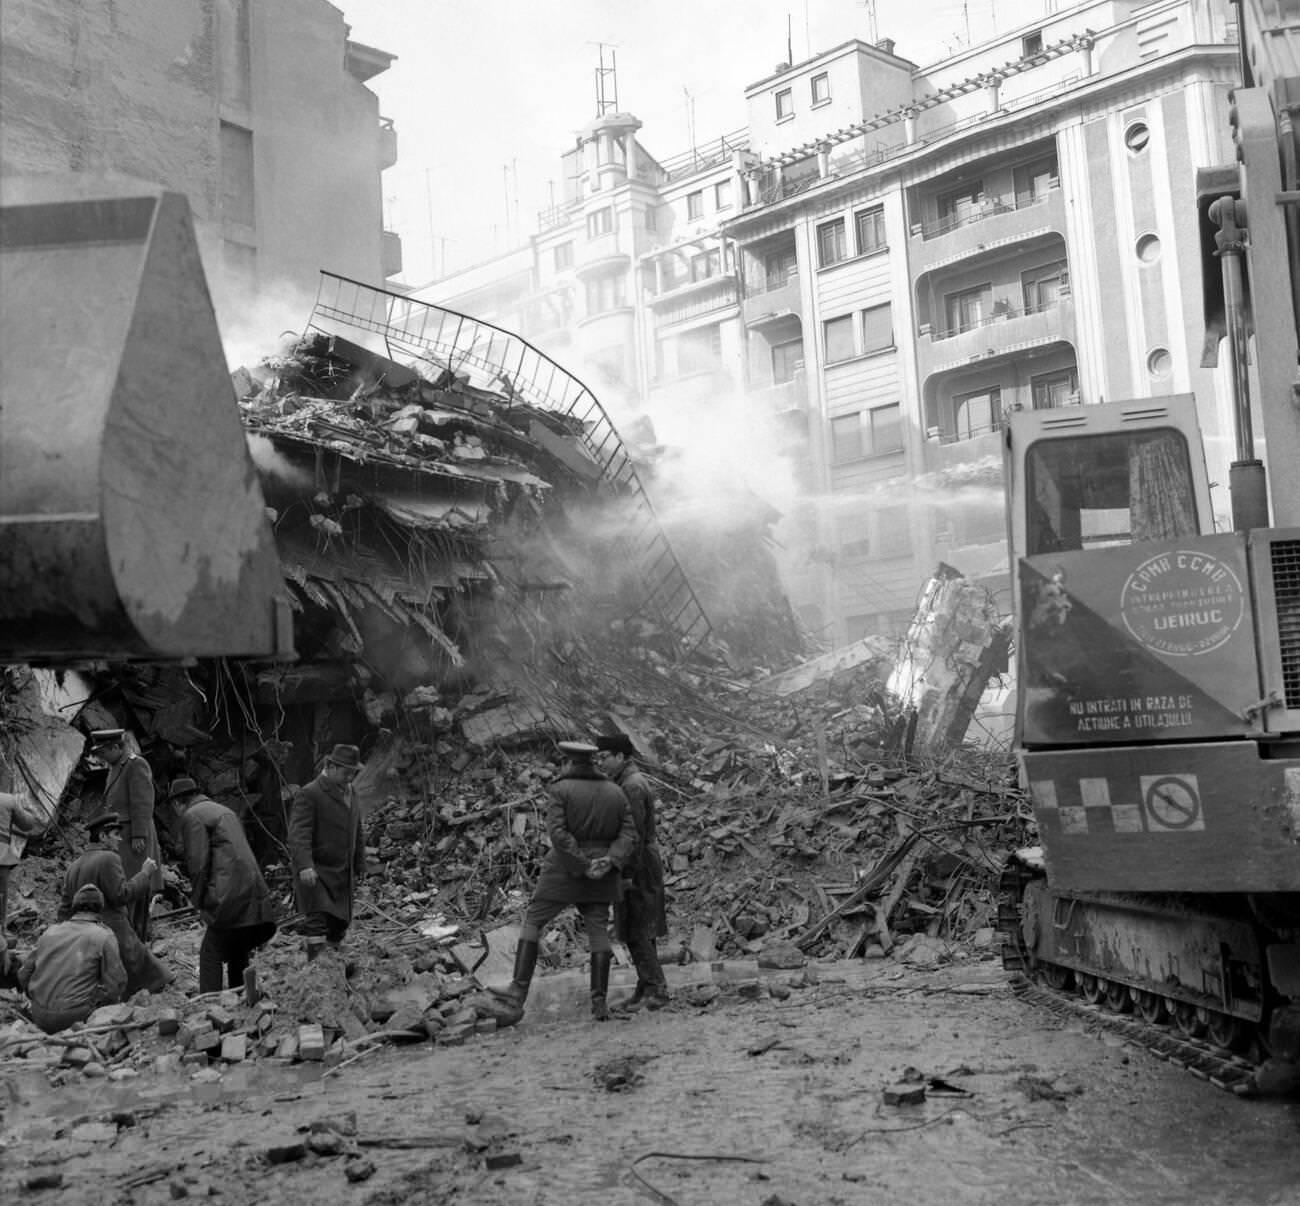 Rescue operation after the deadly earthquake in Bucharest, Romania, March 1977.